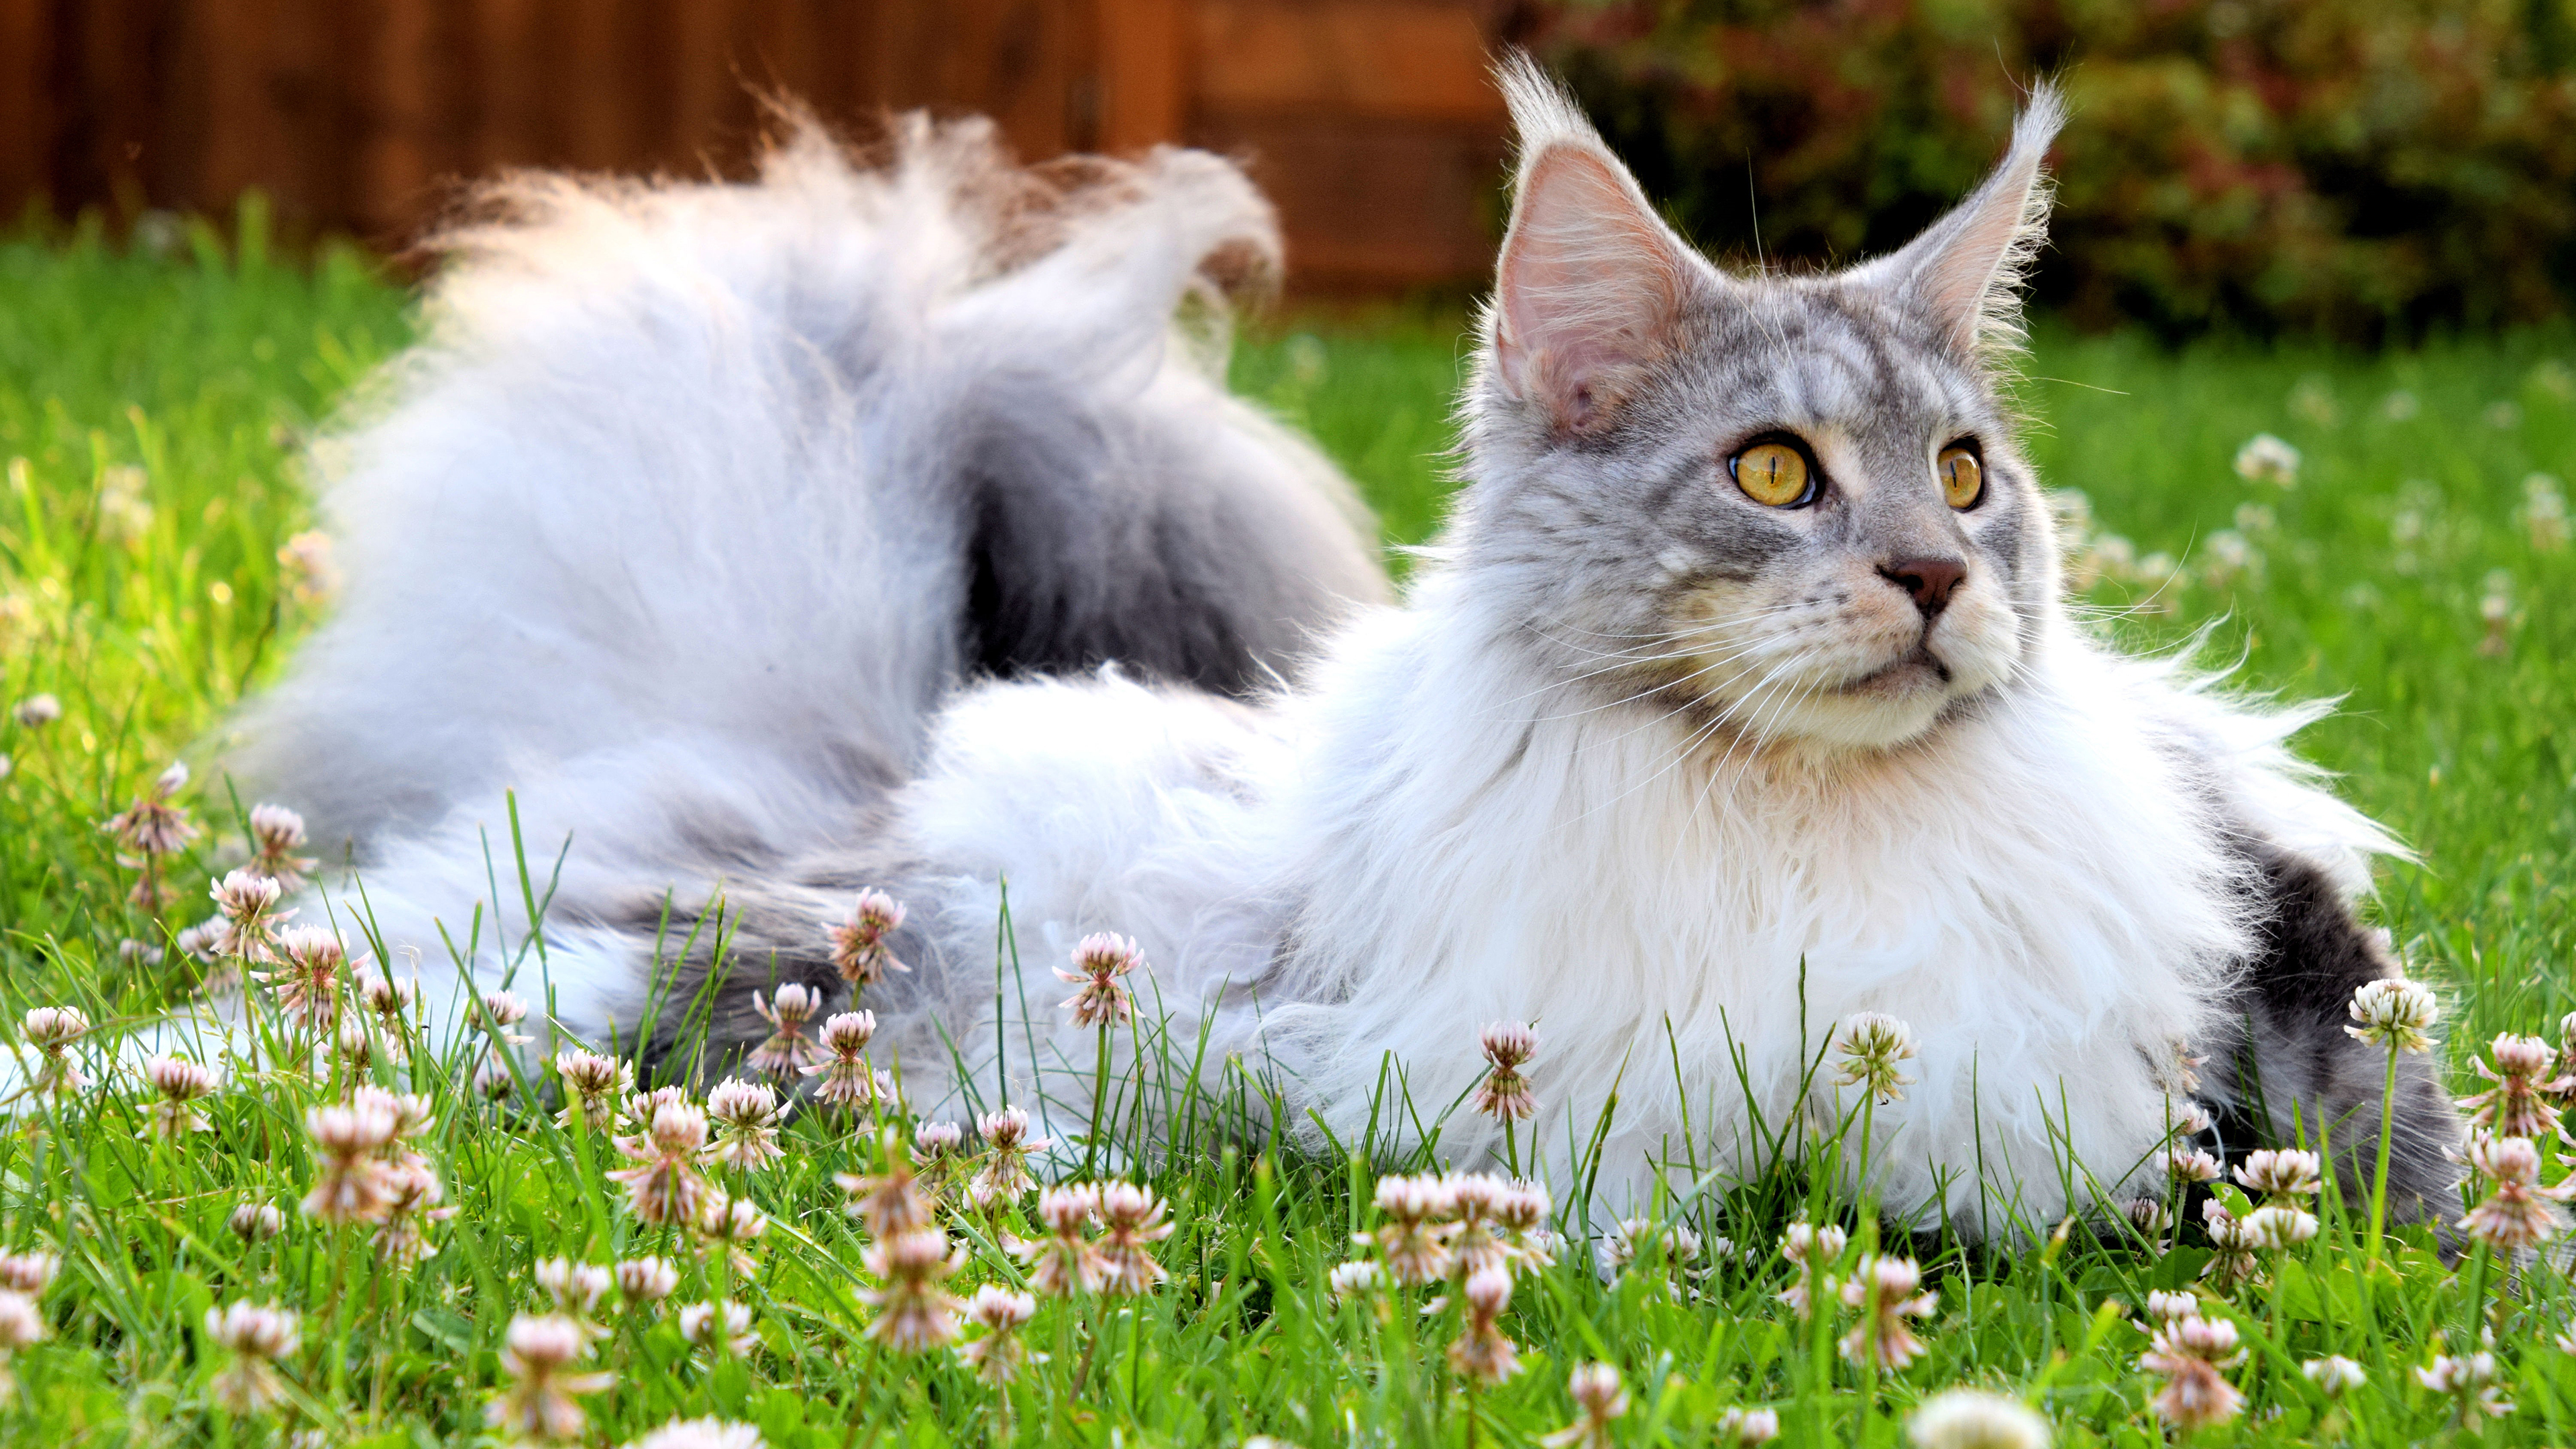 Luxurious Maine Coon on the lawn · free photo